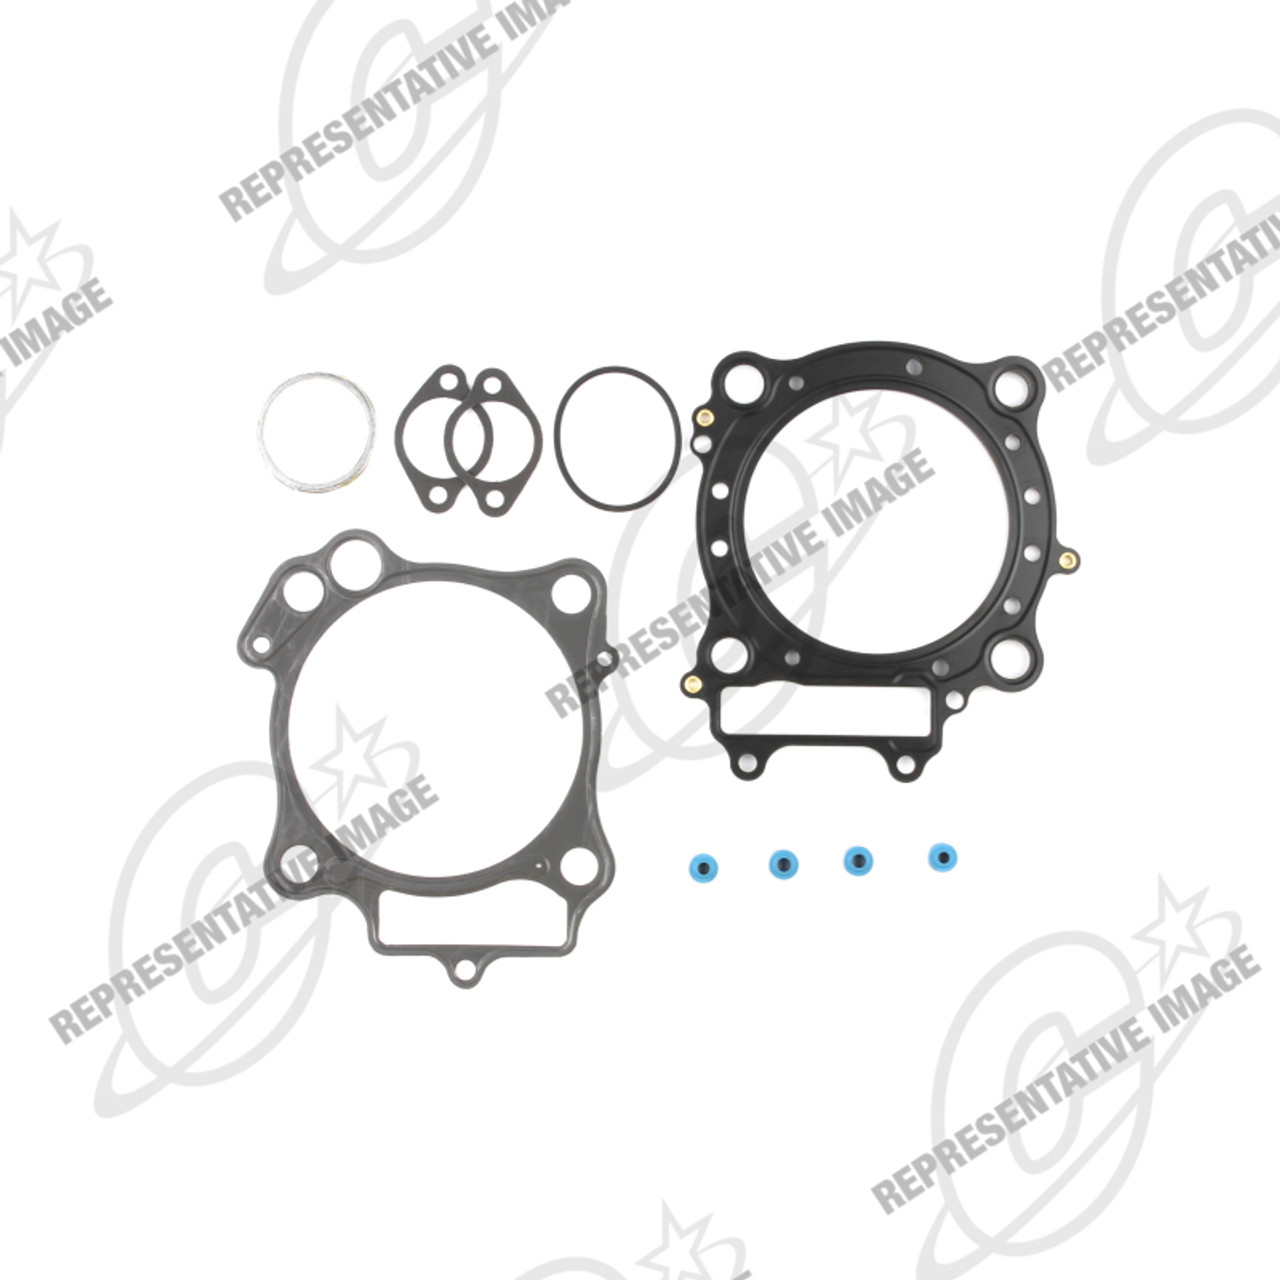 Cometic 02-04 Yamaha SX Viper 70mm Bore Exhaust Gasket Kit - C4036EX Photo - Primary